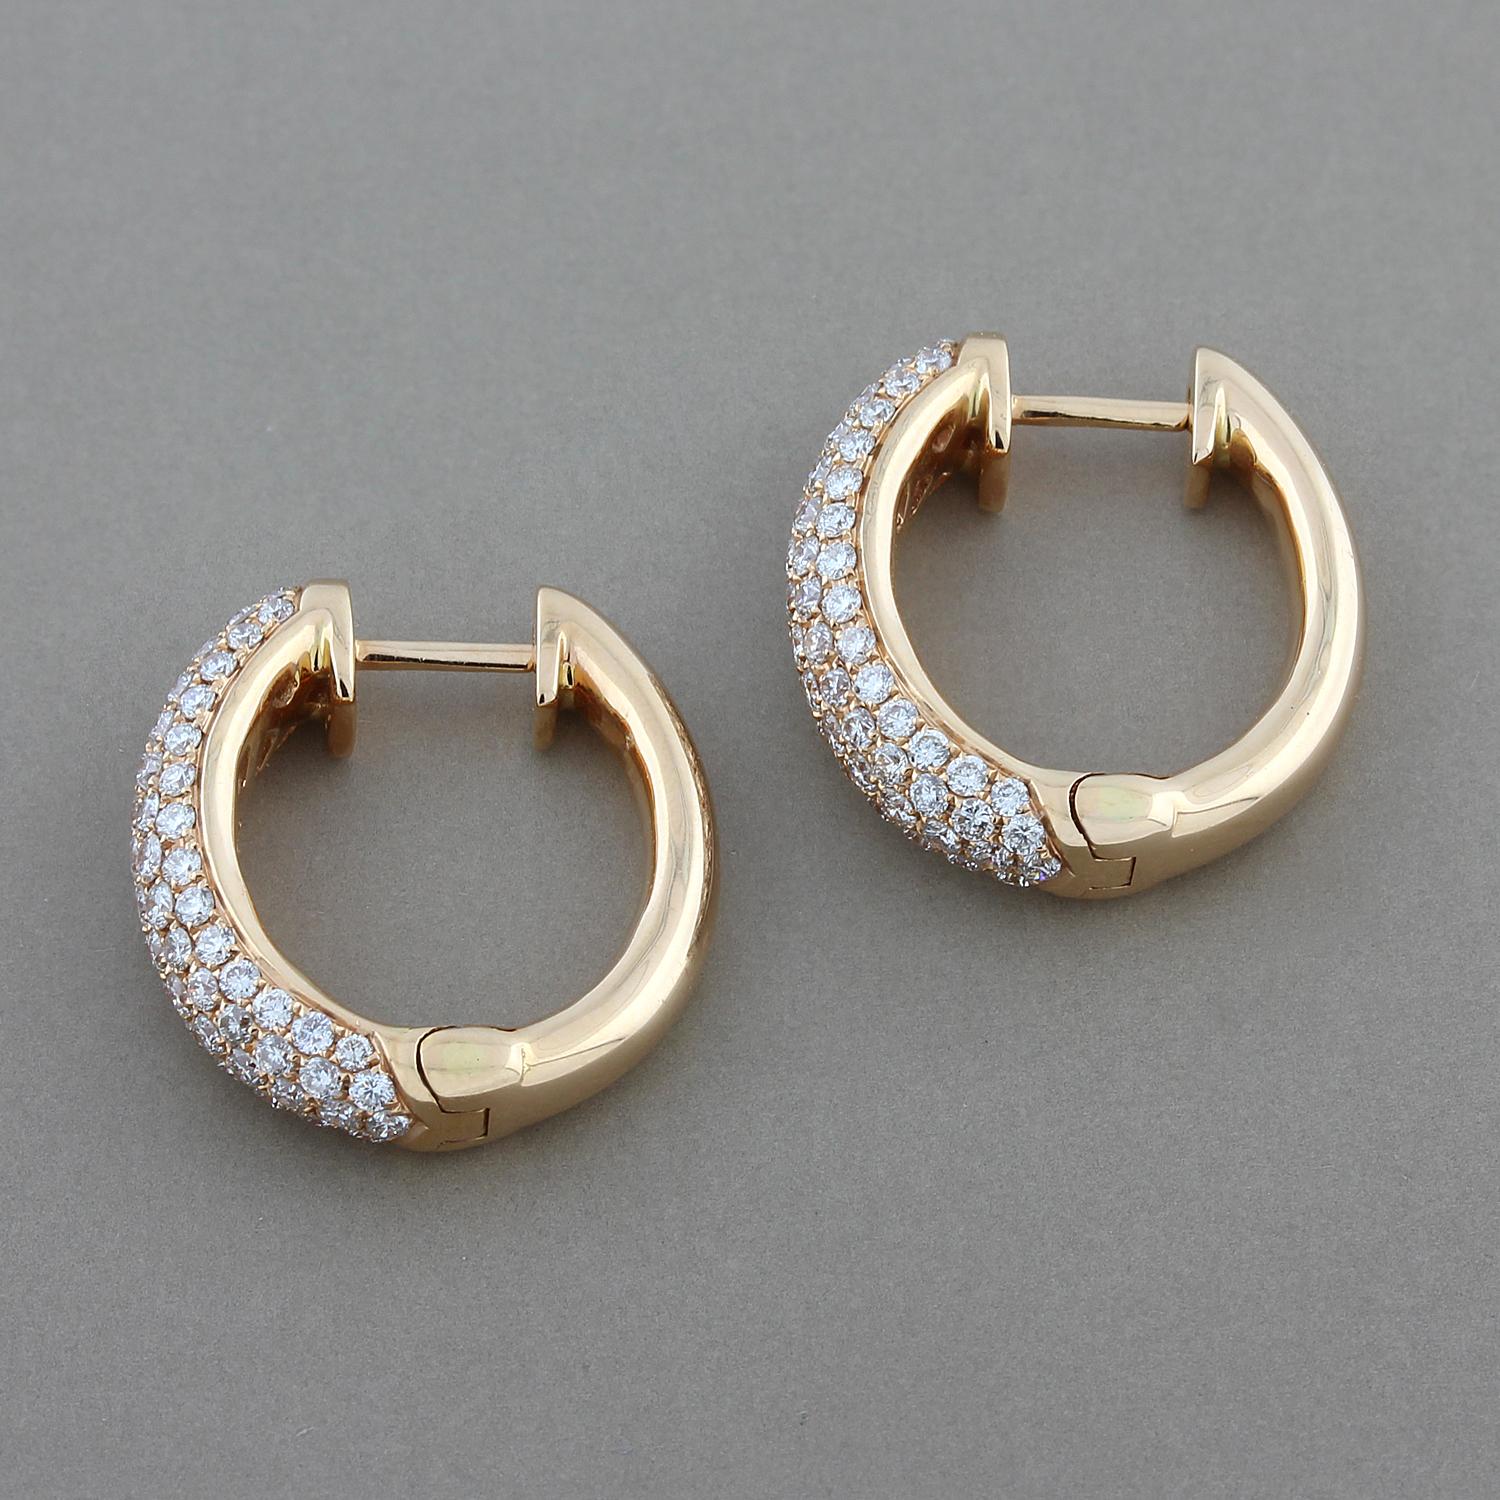 The perfect pair of hoop earrings that can be worn casually or dressed up for a night out. They feature 1.59 carats of VS quality round cut pave set diamonds in 18K rose gold.

Earring Length: 0.75 inches
Earring Width: 0.70 inches